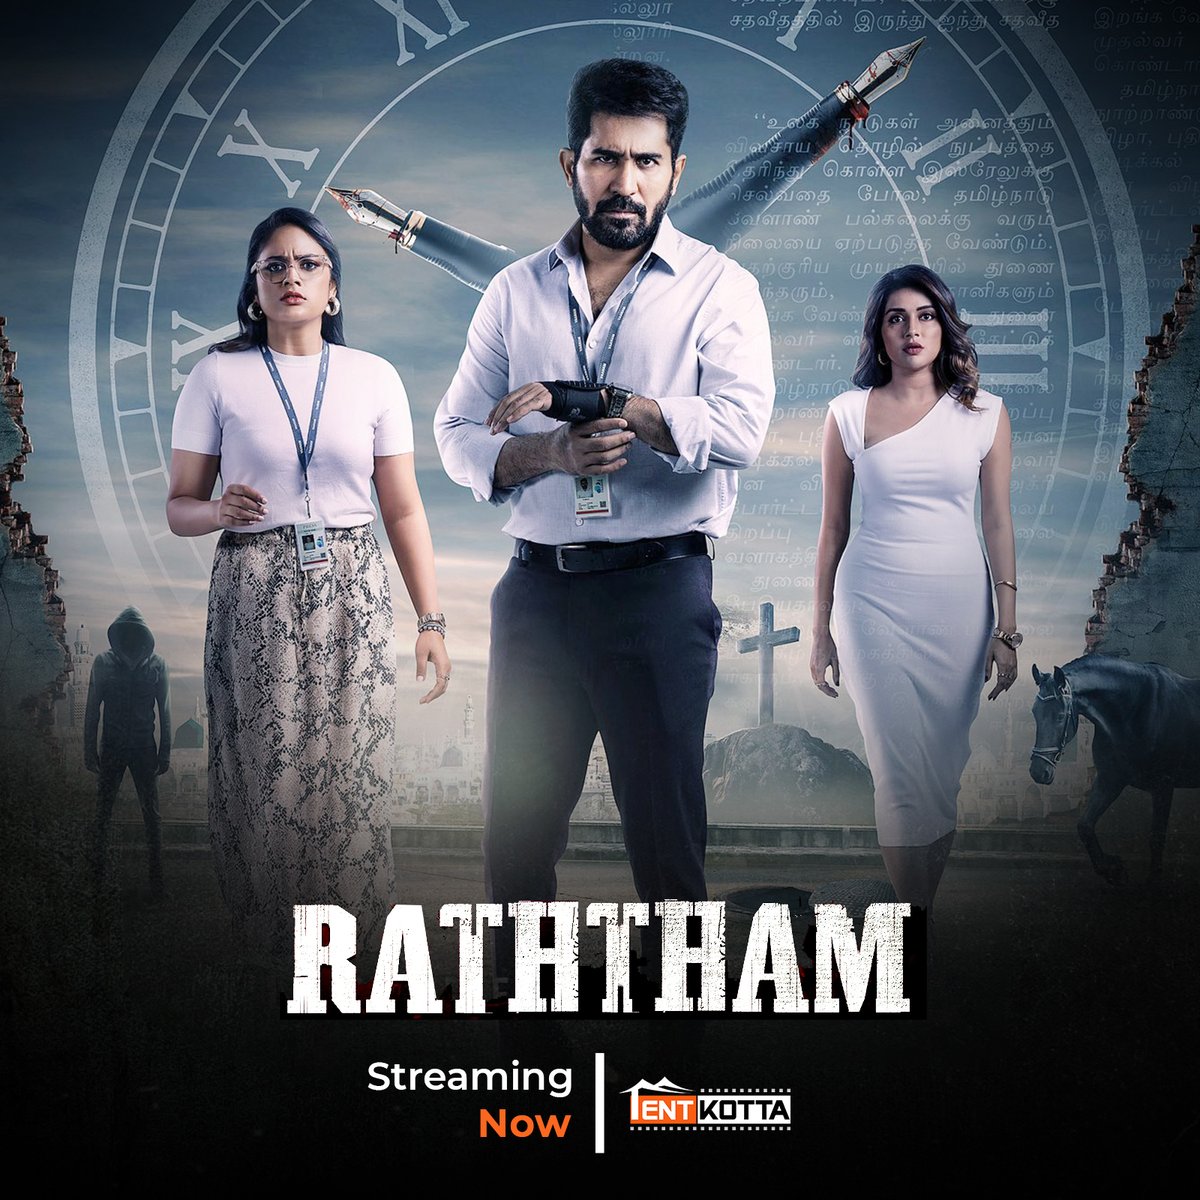 Dive into the high-stakes world of journalism where the ink is mightier than the sword. Get ready for a thrilling newsroom showdown! 📽️ 🩸#Raththam, streaming Now on #Tentkotta @vijayantony @csamudhan @fvinfiniti @mahima_Nambiar @nanditasweta @bKamalBohra @Dhananjayang…